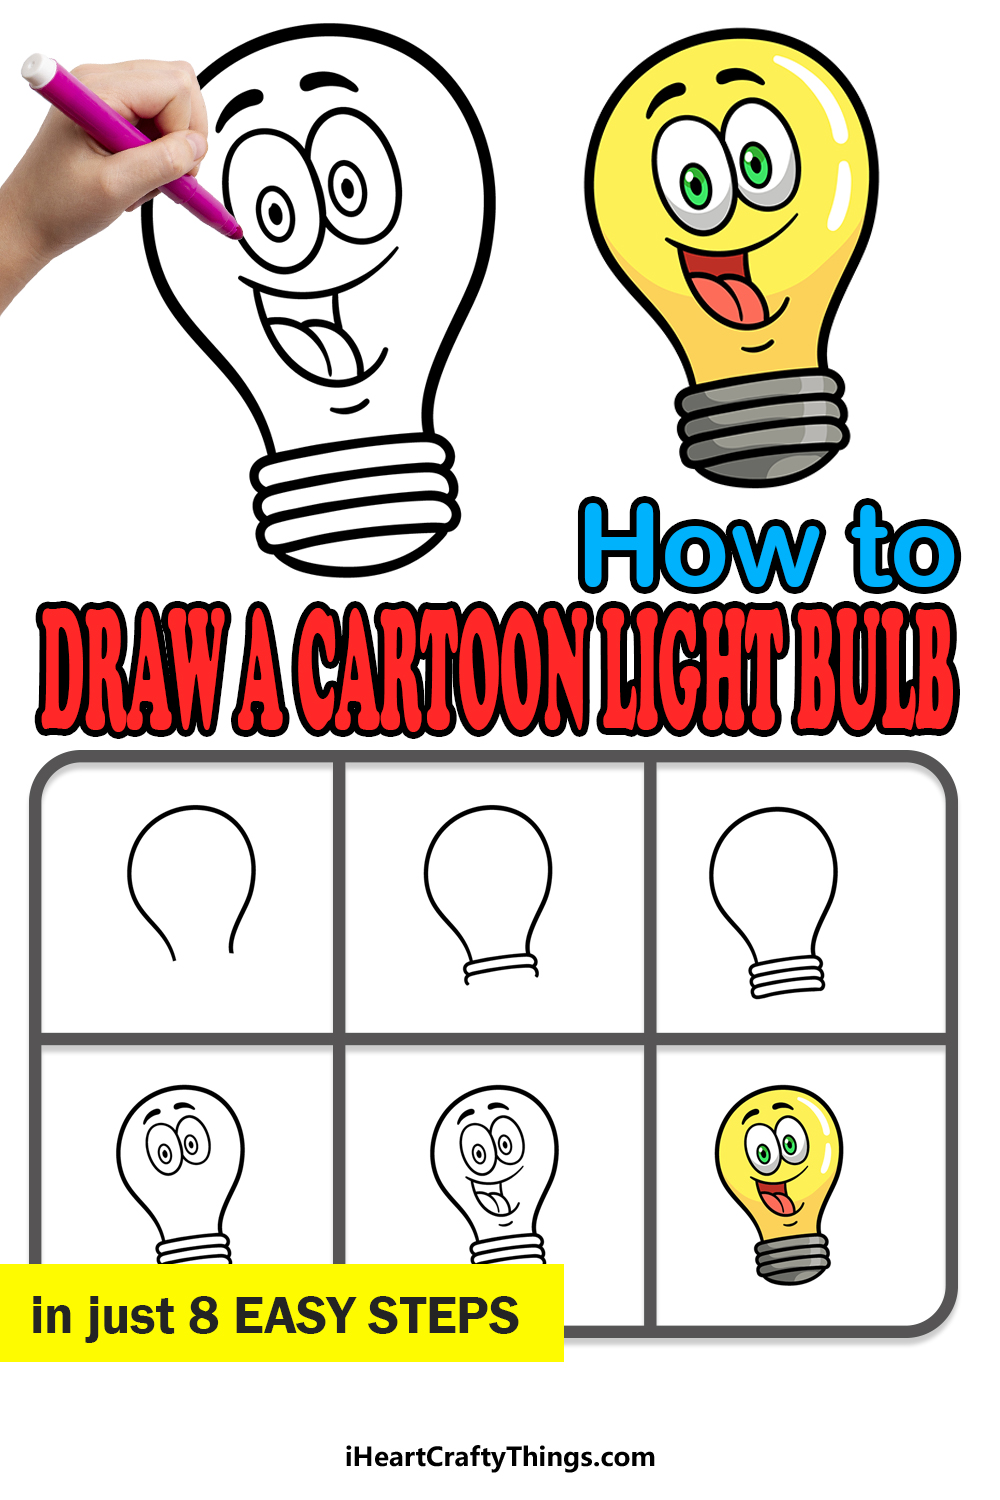 how to draw a cartoon Light Bulb in 8 easy steps